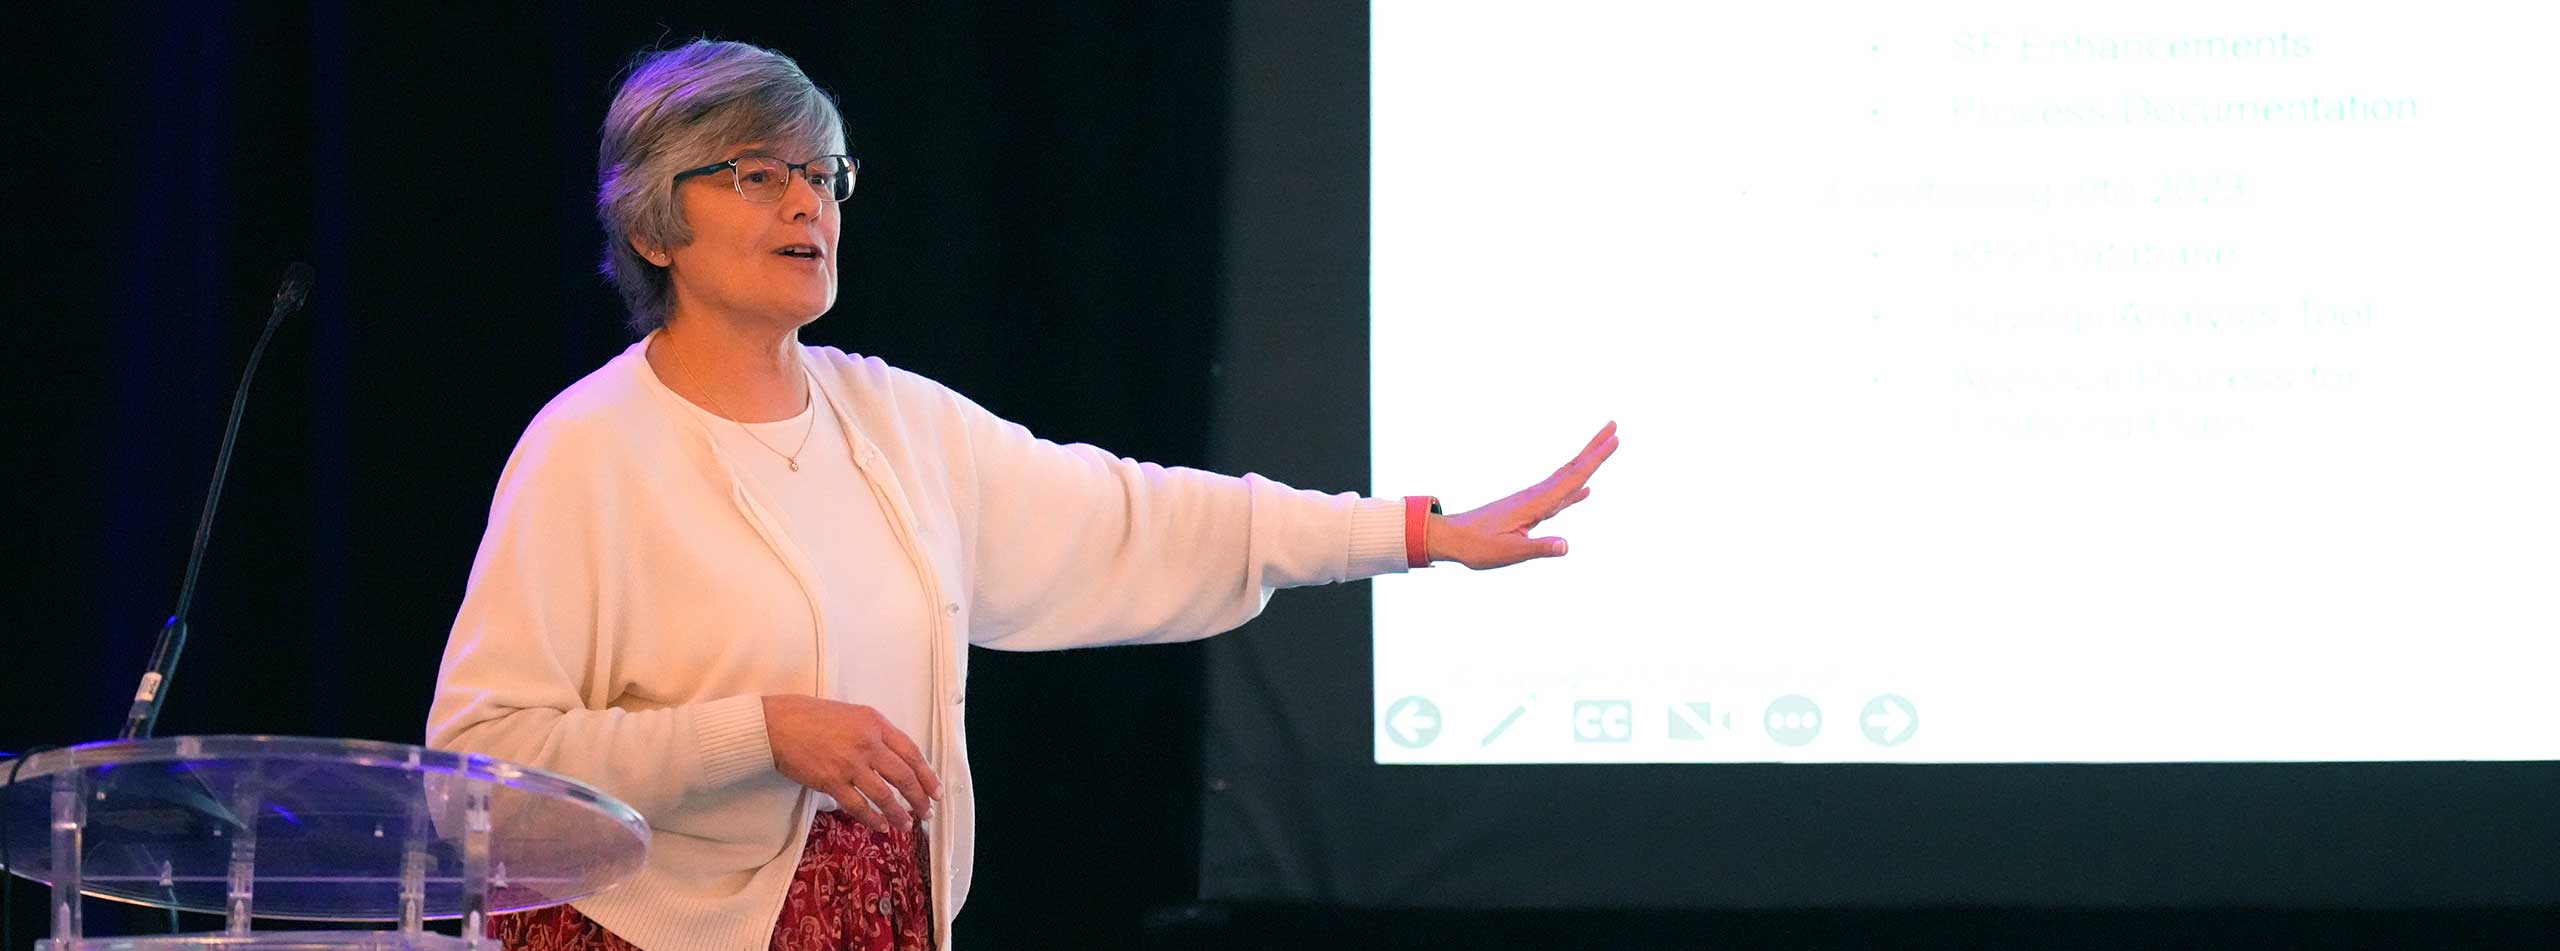 Sheela Andrews giving a presentation on a stage